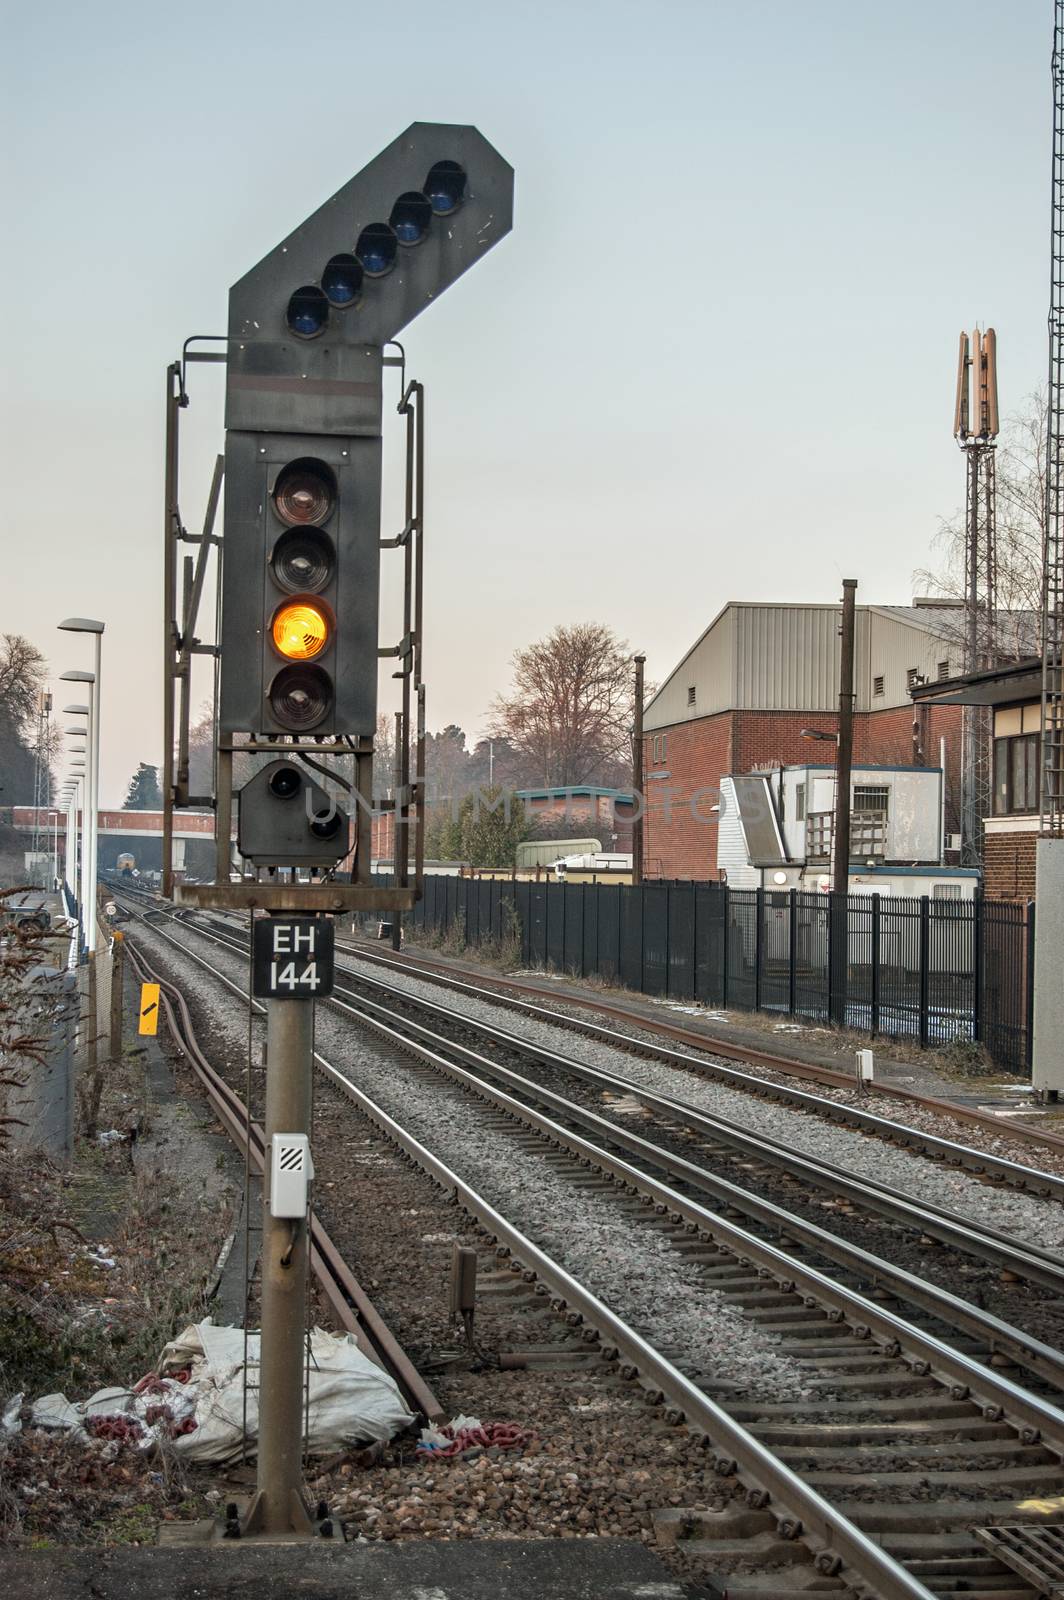 Yellow caution signal on railway line in UK by BasPhoto